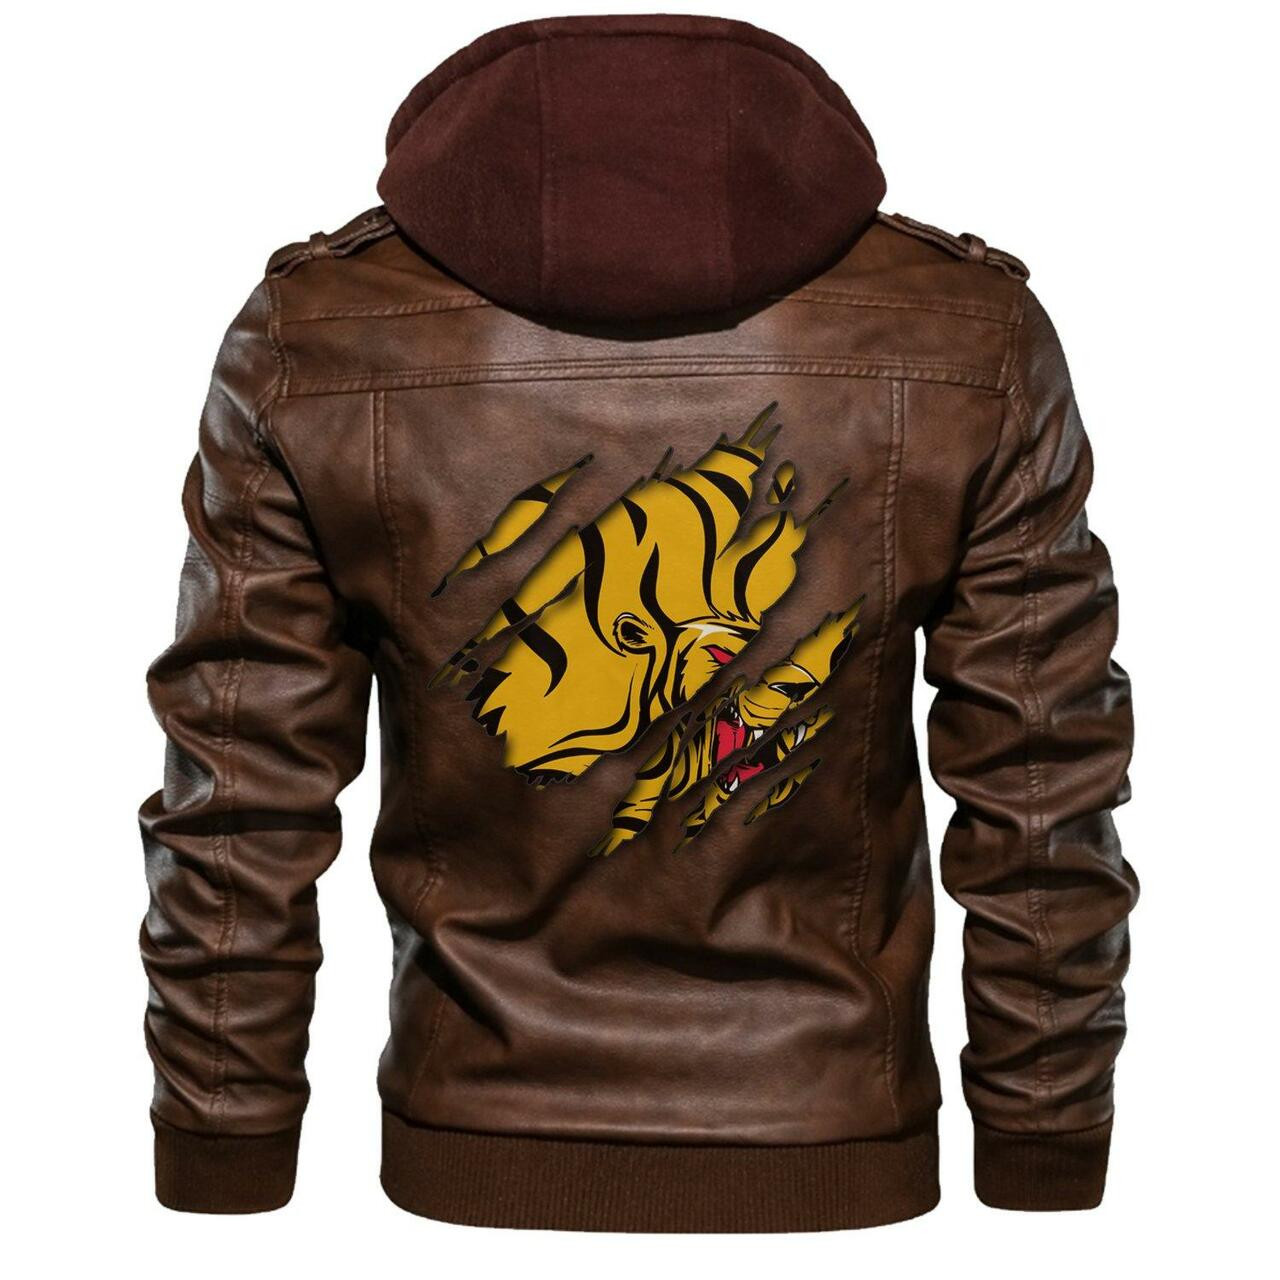 You'll get the best Leather Jacket by shopping online 221